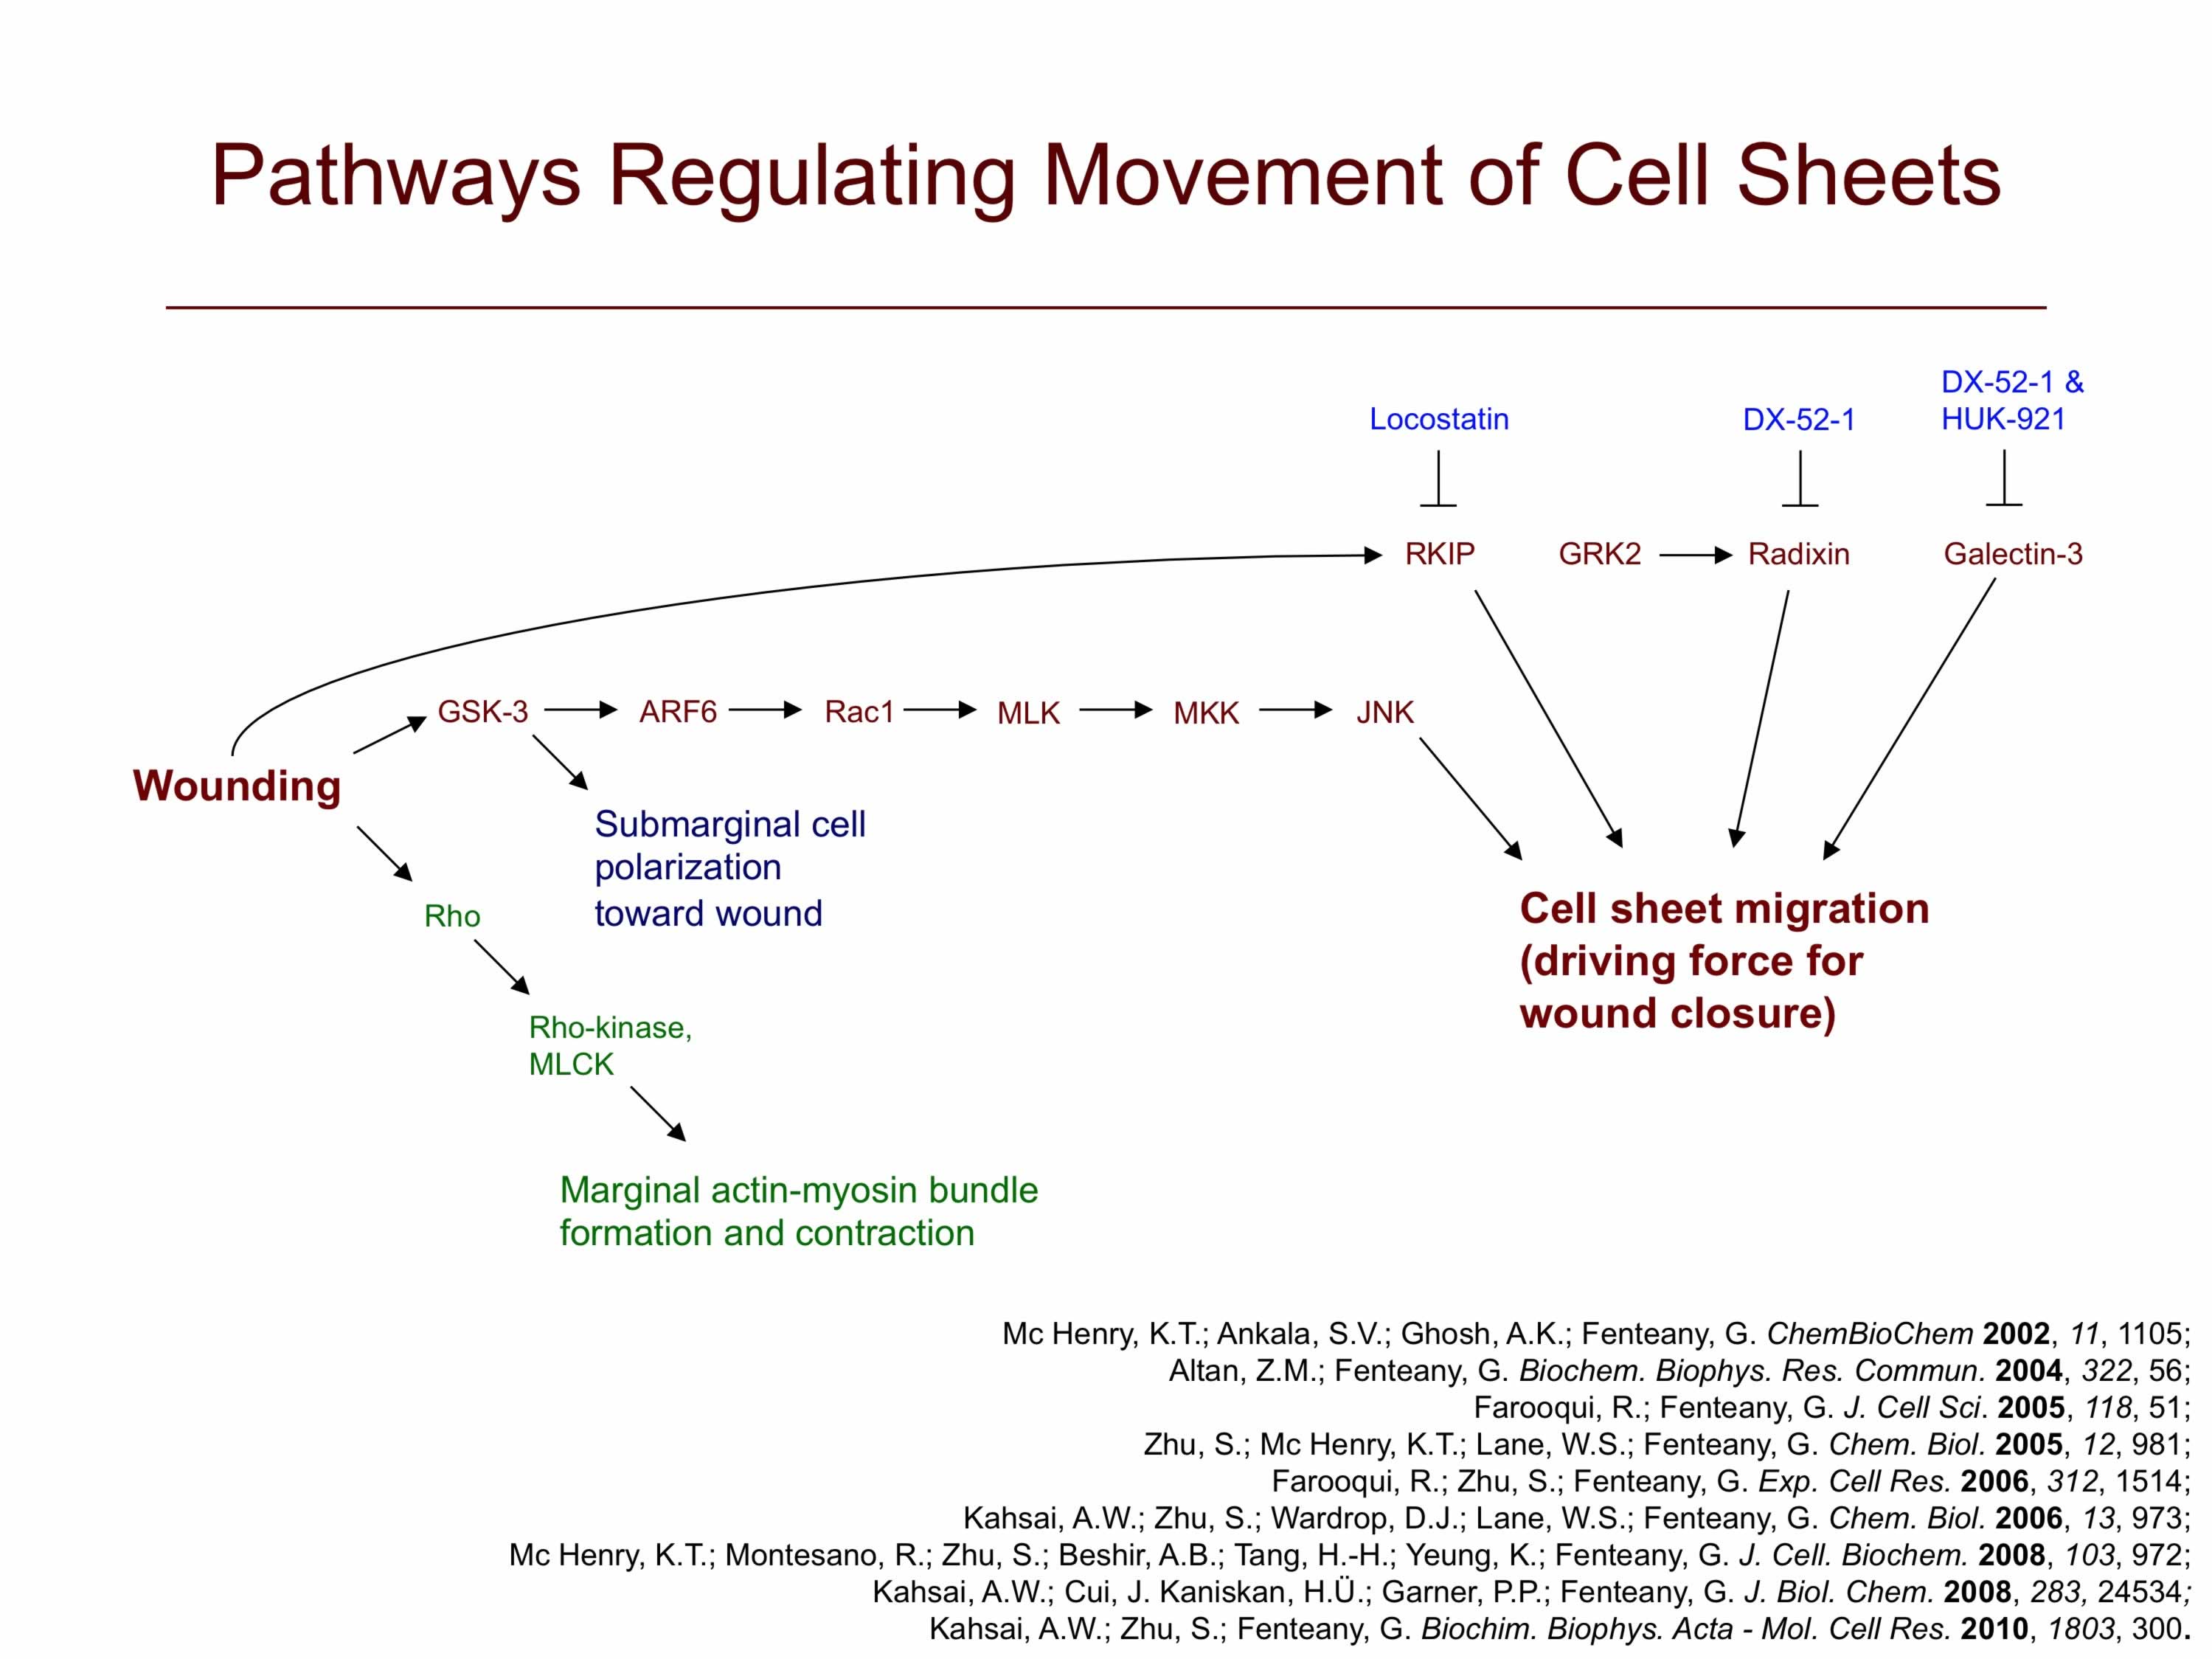 Signaling to Cell Sheet Migration and Wound Closure